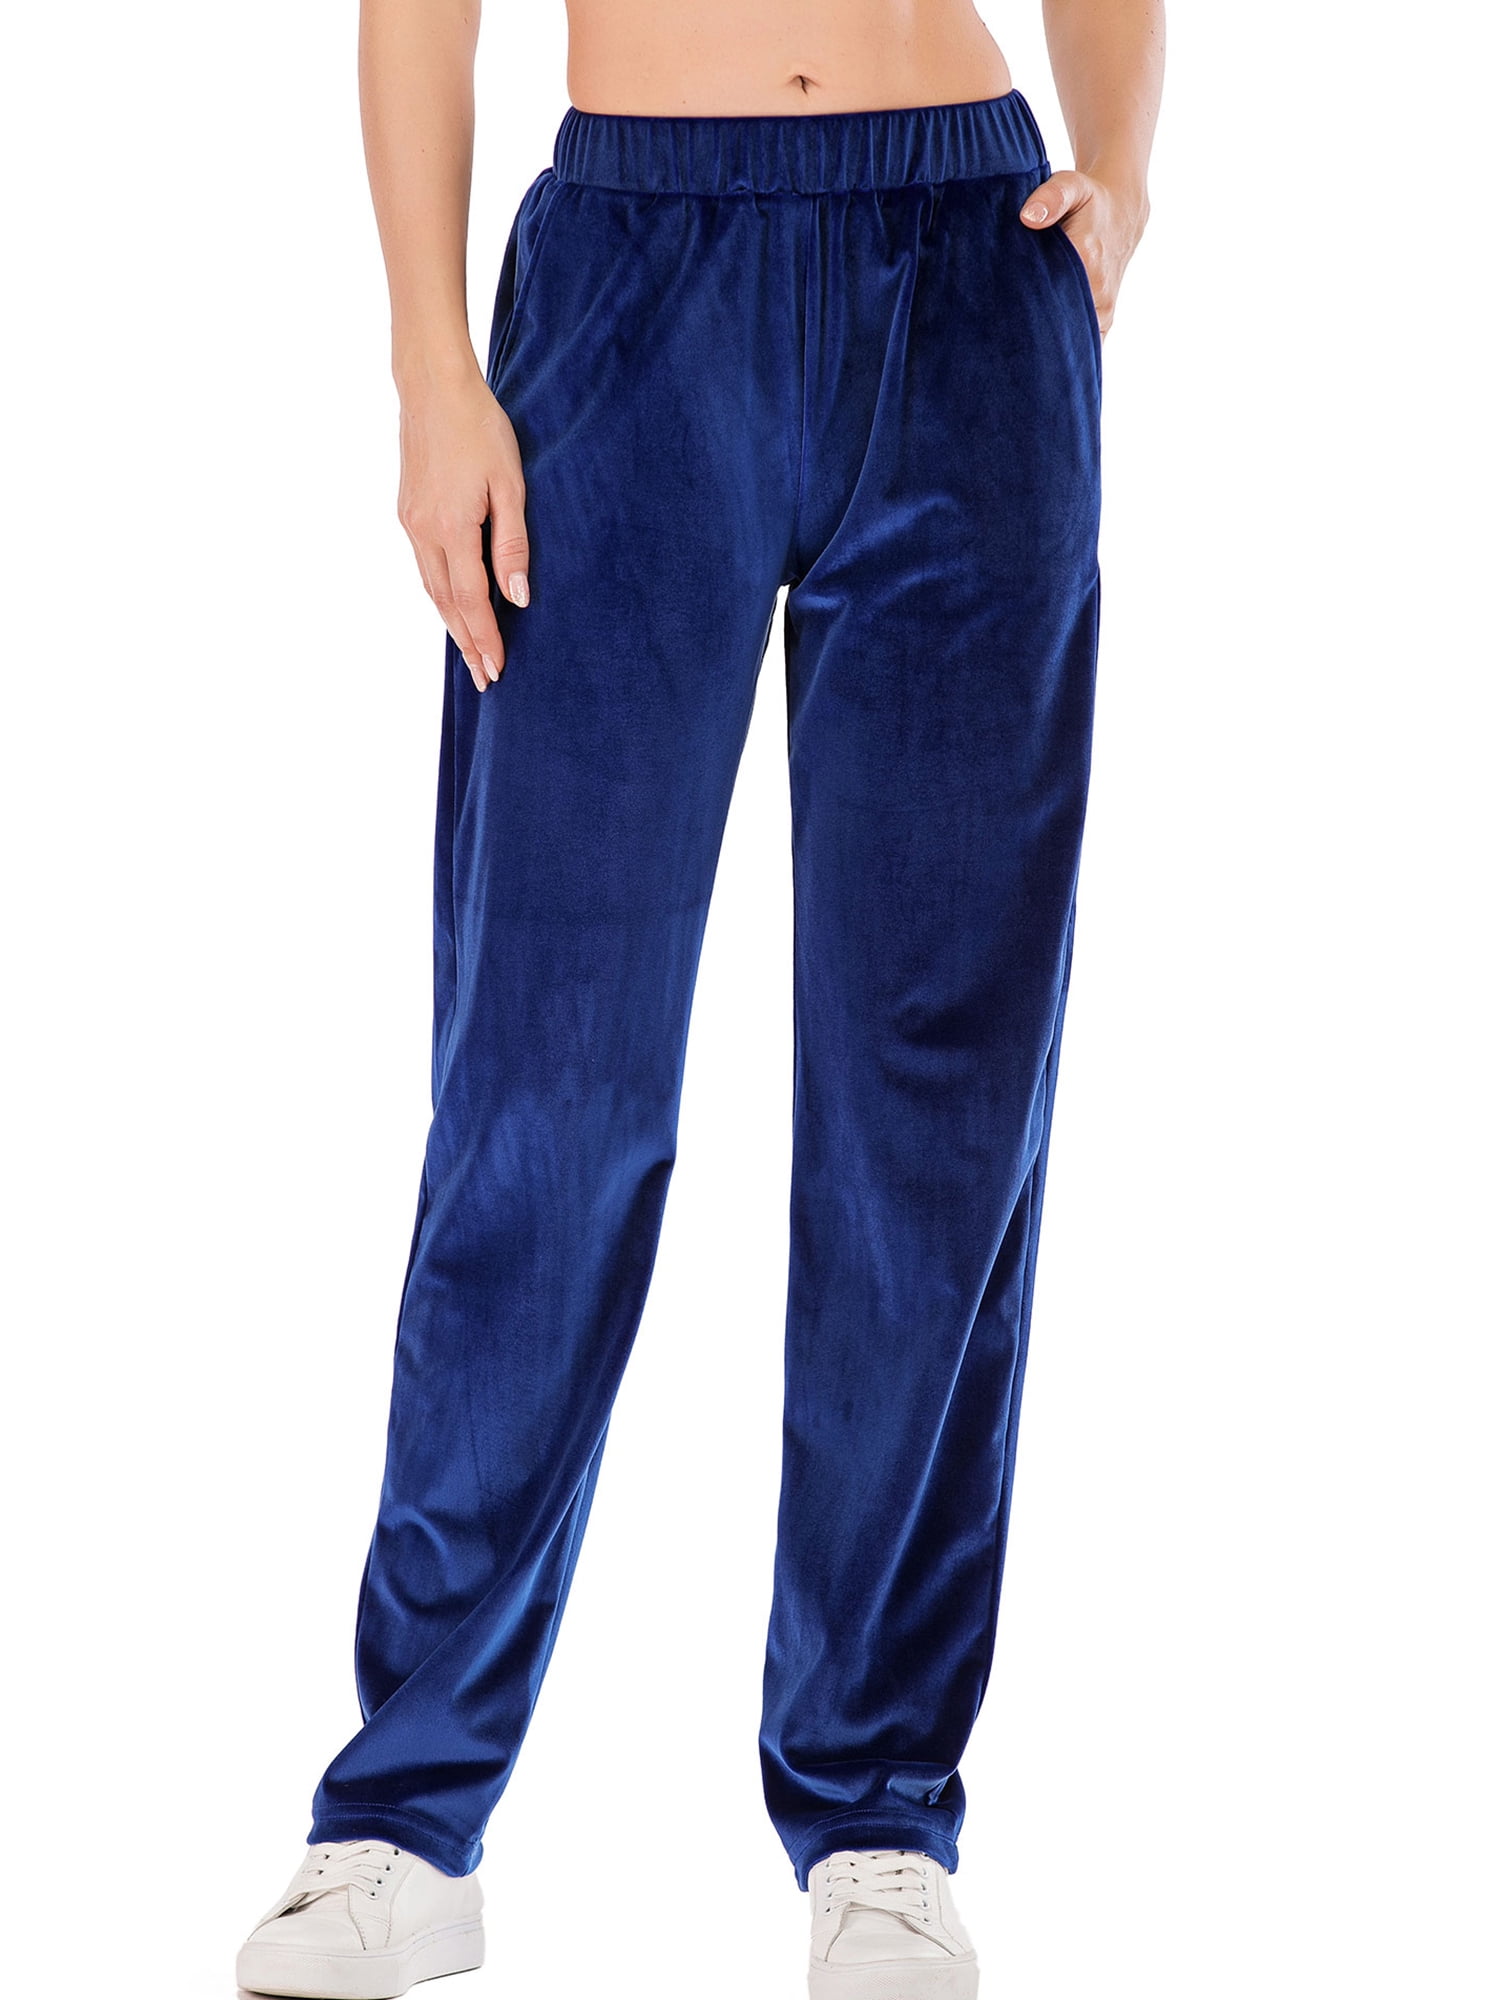 Striped Women Grey, Blue Track Pants Price in India - Buy Striped Women  Grey, Blue Track Pants online at Shopsy.in